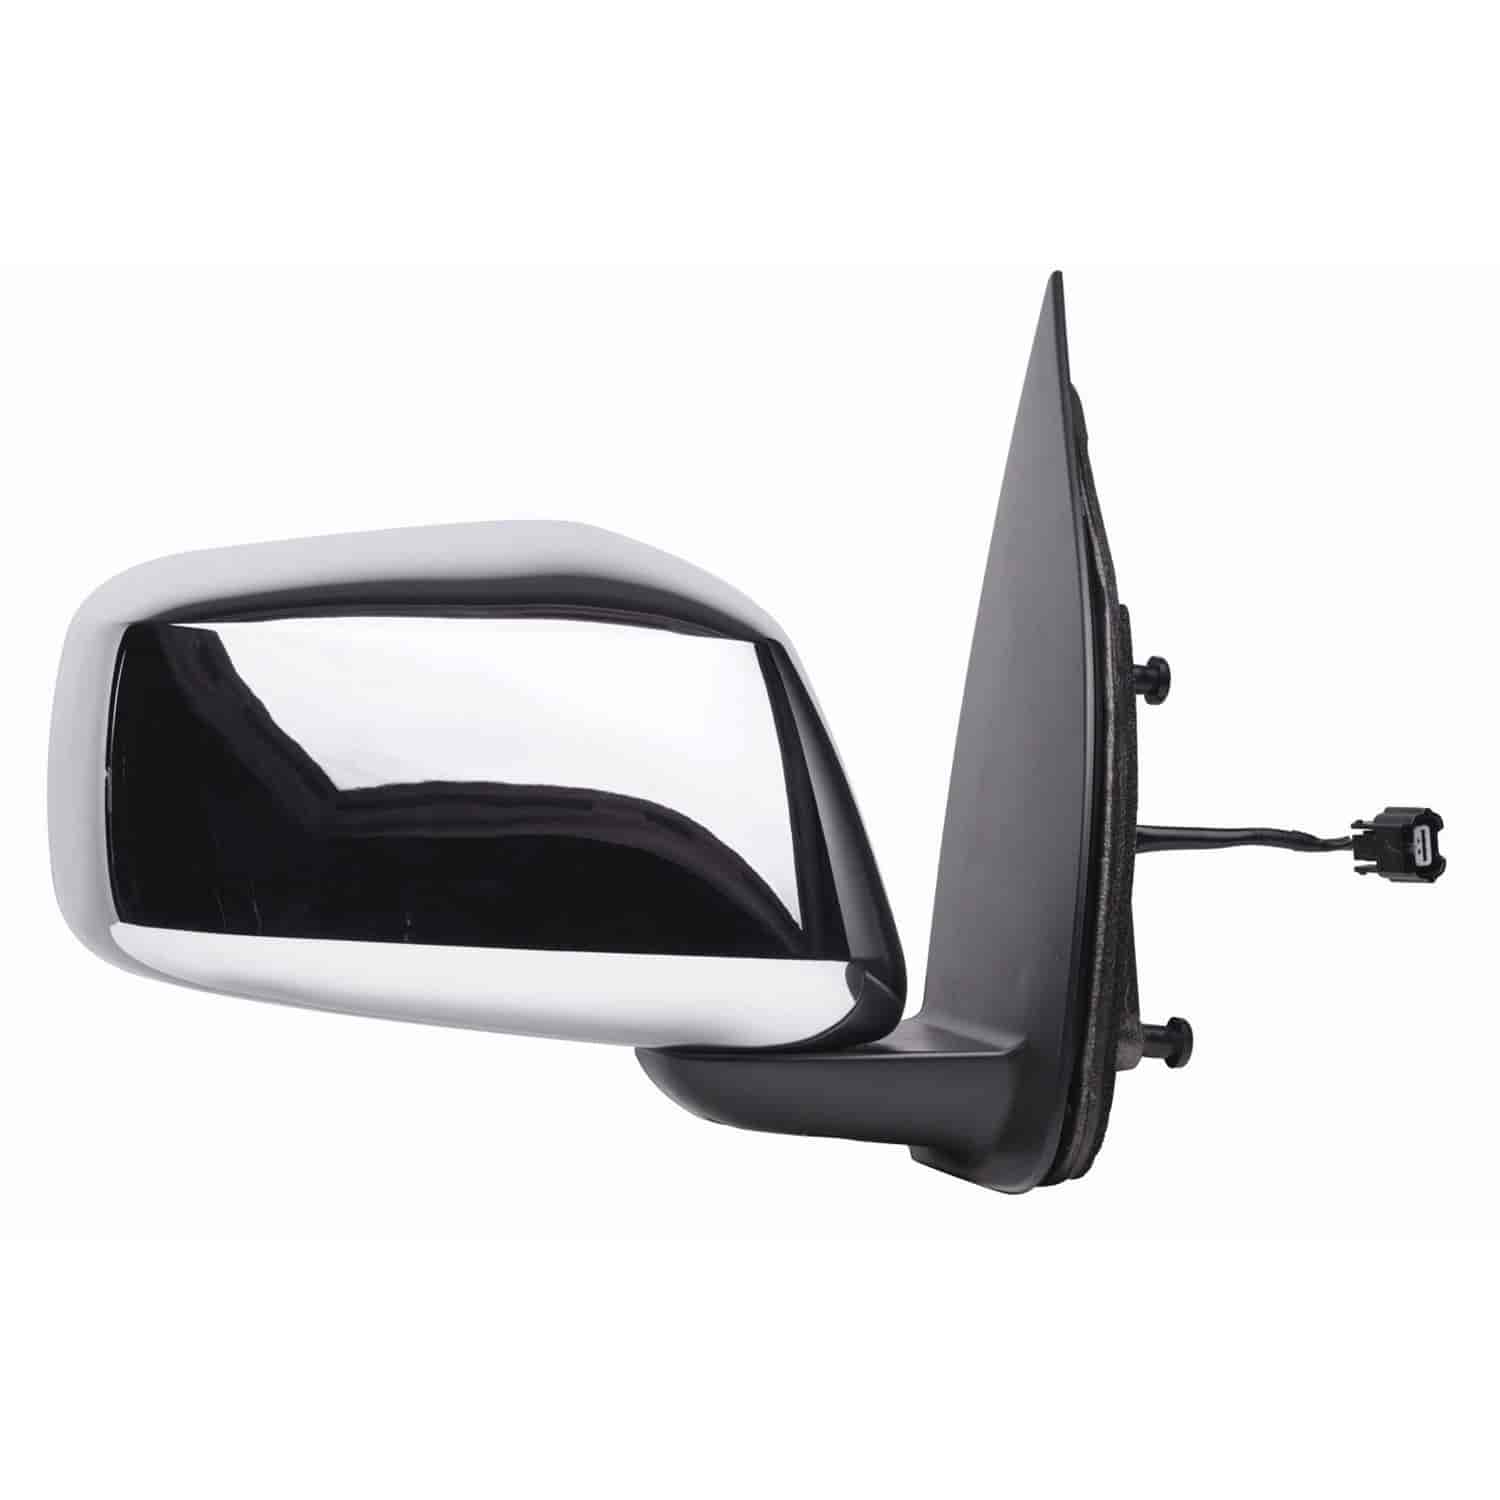 OEM Style Replacement mirror for 05-14 Nissan Frontier extended/crewcab Xterra passenger side mirror